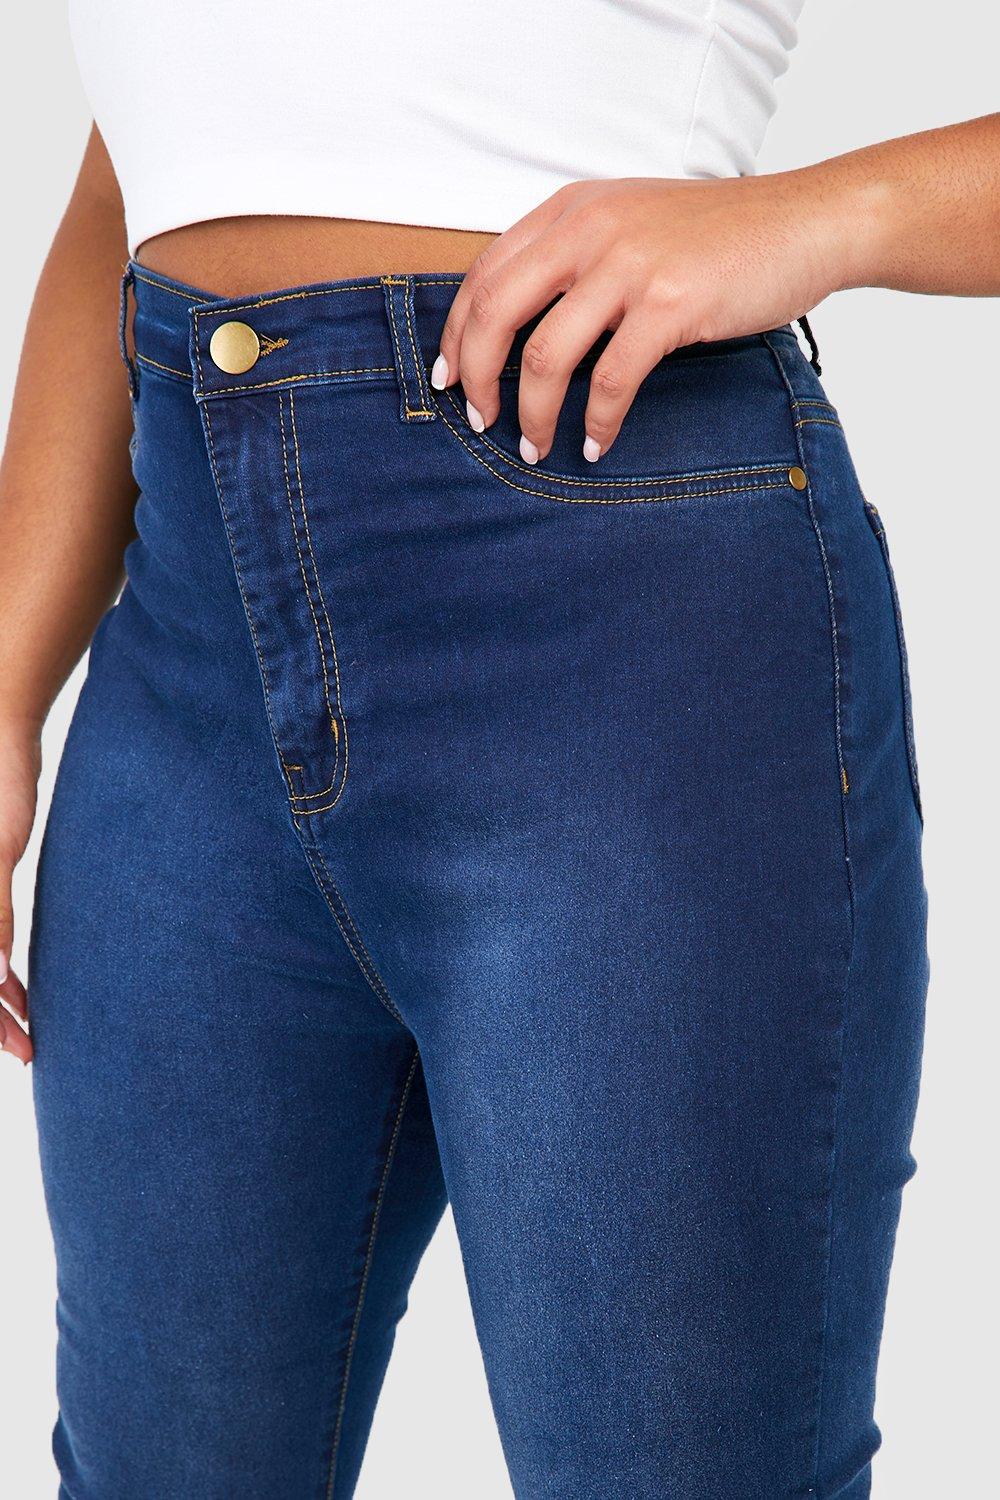 Buy Friends Like These Dark Blue Wash High Waisted Jeggings from